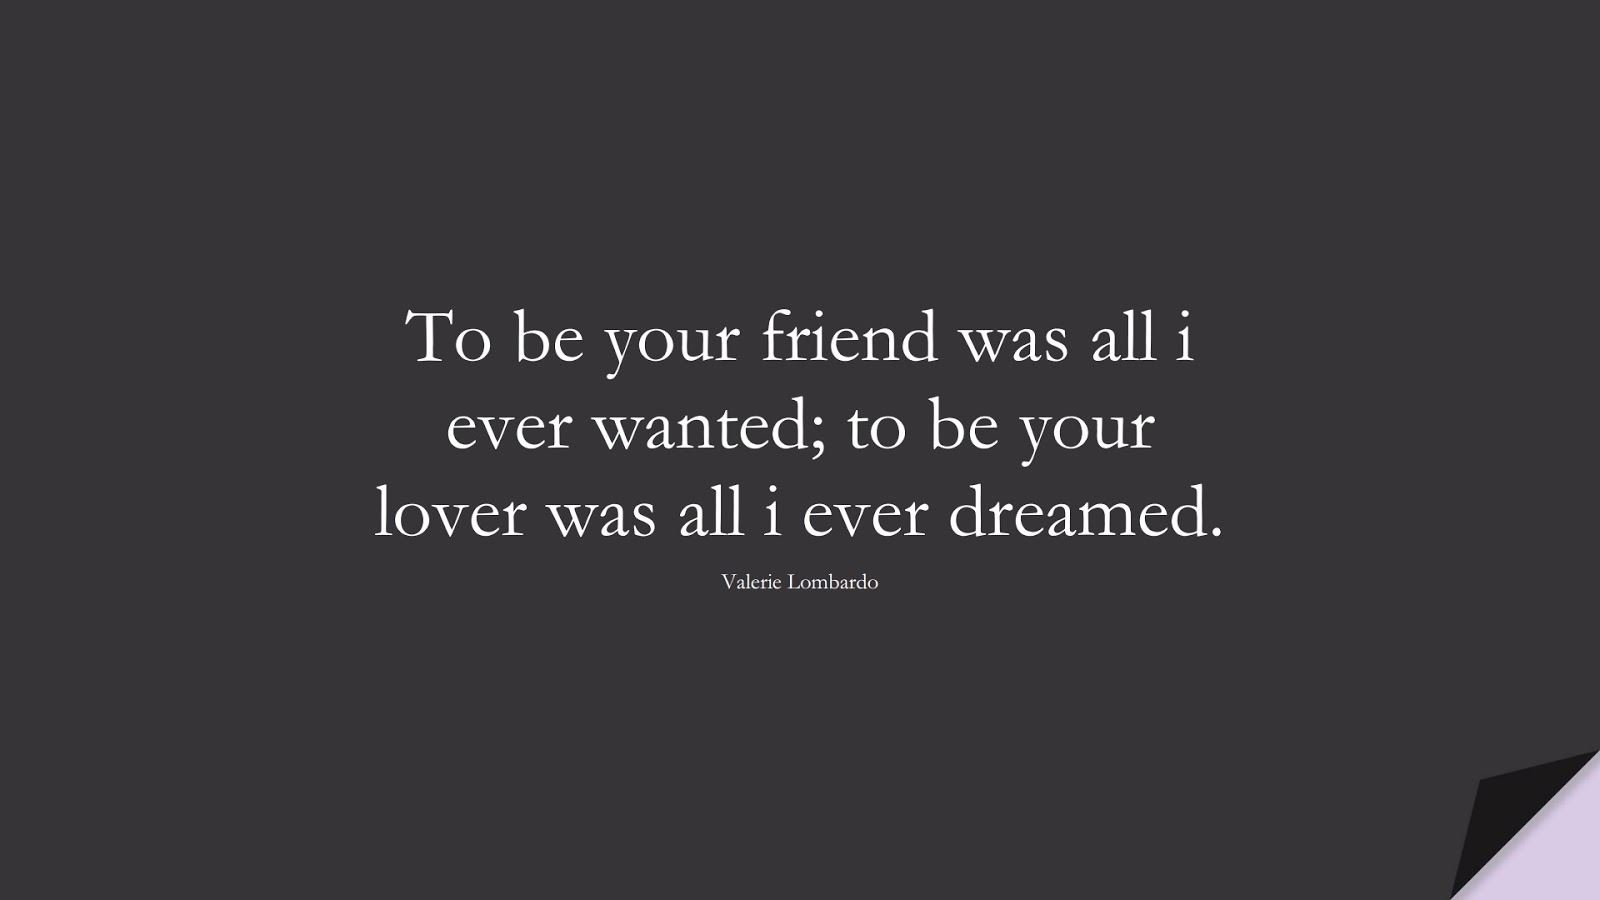 To be your friend was all i ever wanted; to be your lover was all i ever dreamed. (Valerie Lombardo);  #LoveQuotes